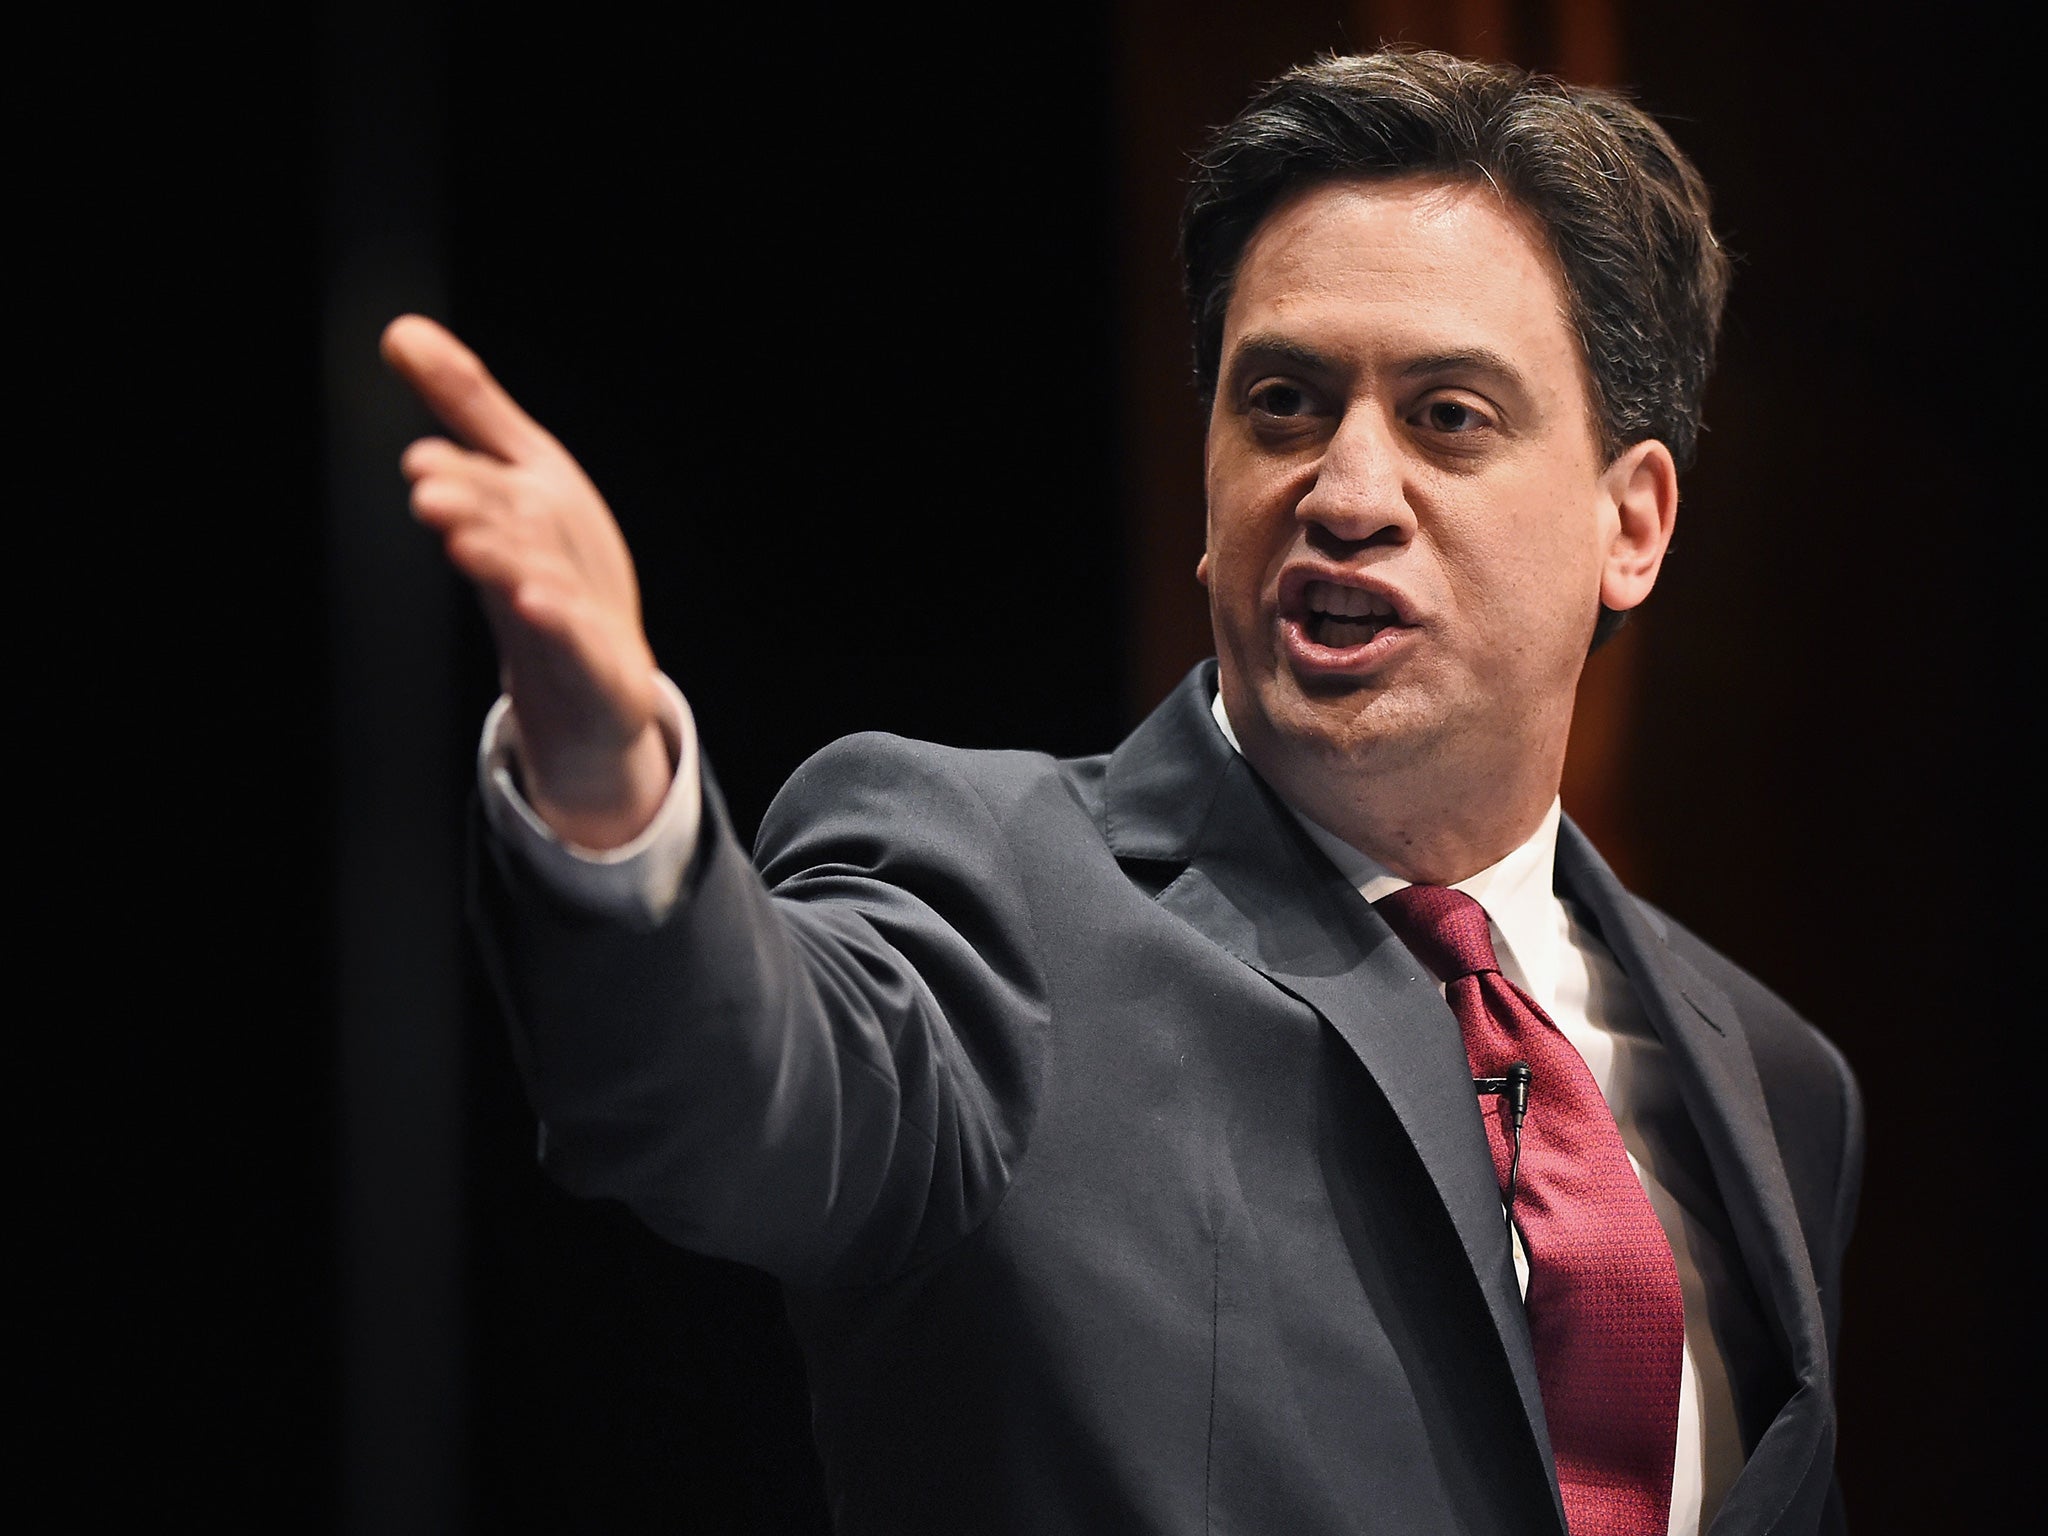 Ed Miliband has pledged to ban zero-hours contracts